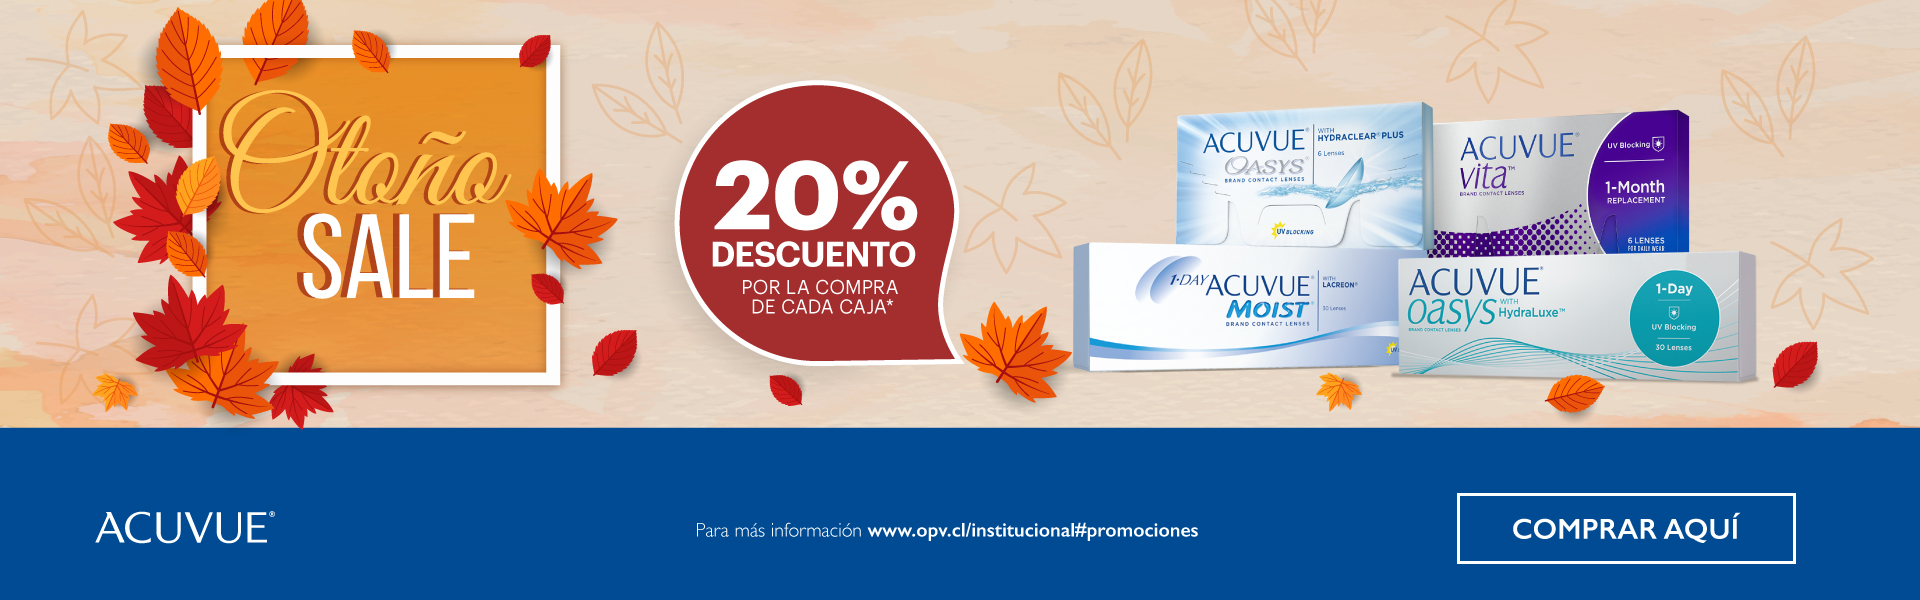 3-Acuvue